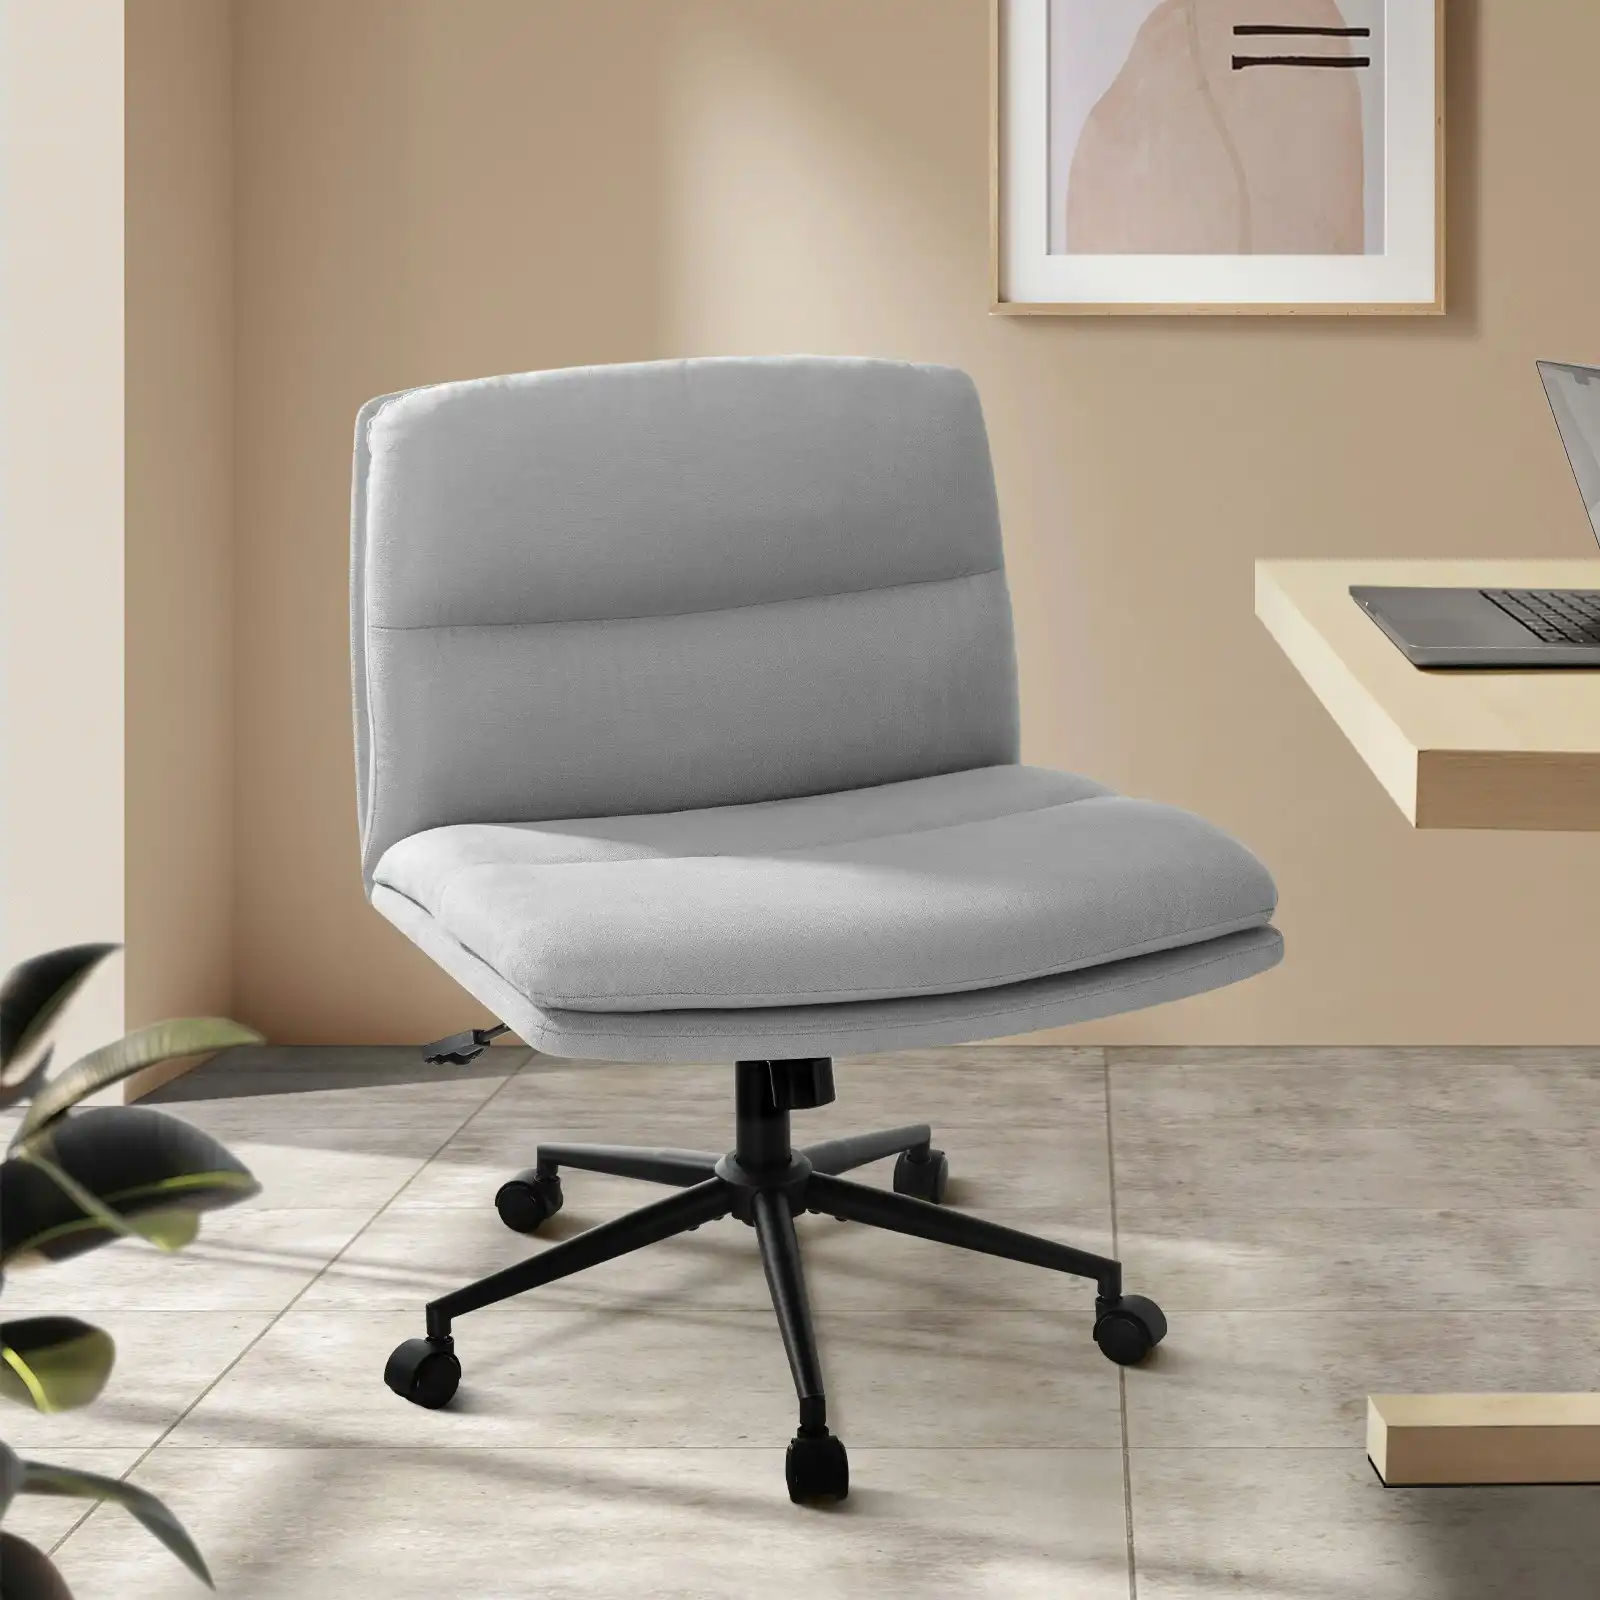 Oikiture Mid Back Armless Office Desk Chair Wide Seat Linen Grey with Wheels